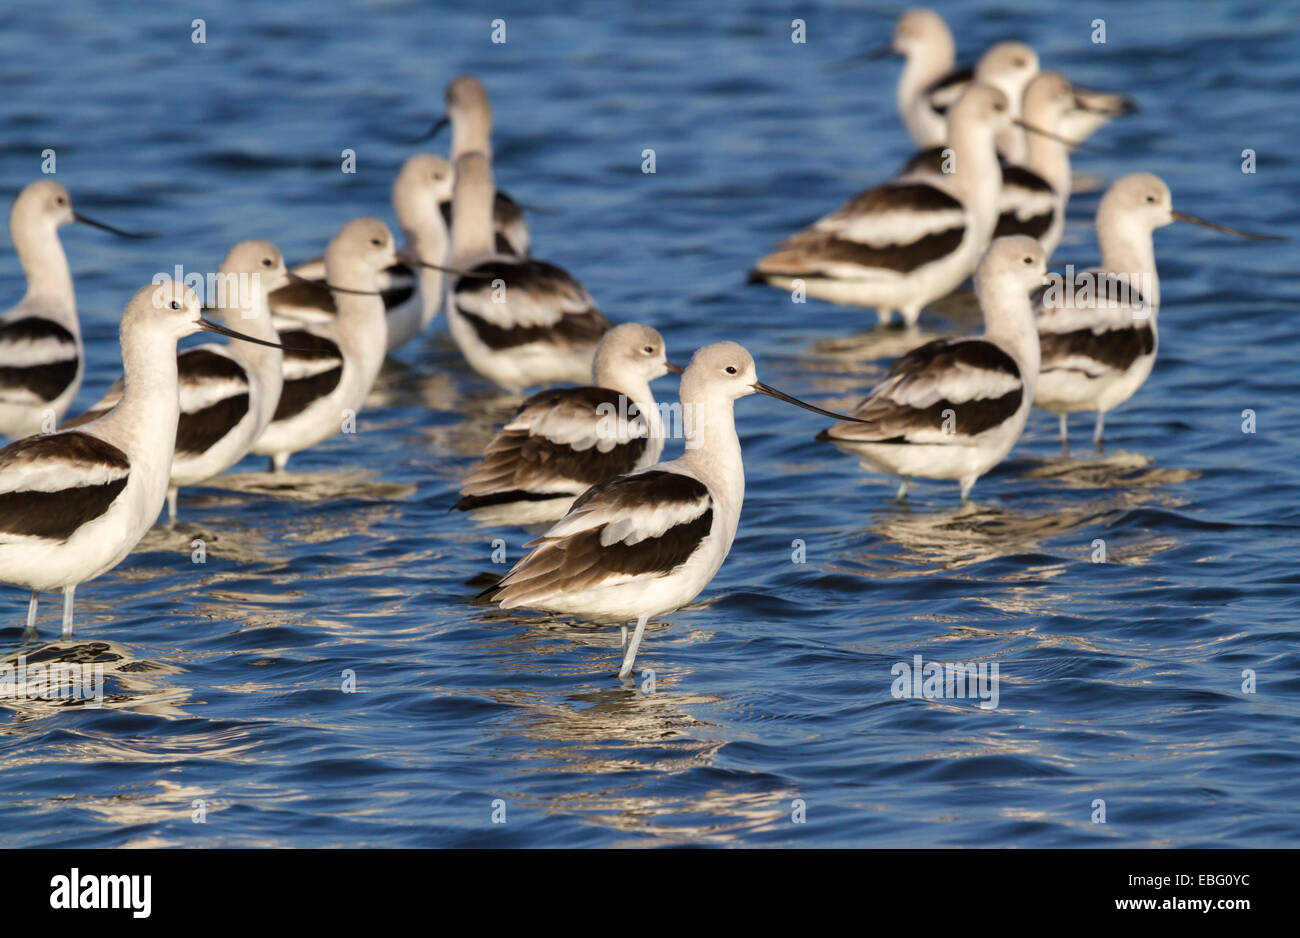 A group of American avocets (Recurvirostra americana) in shallow water. Stock Photo